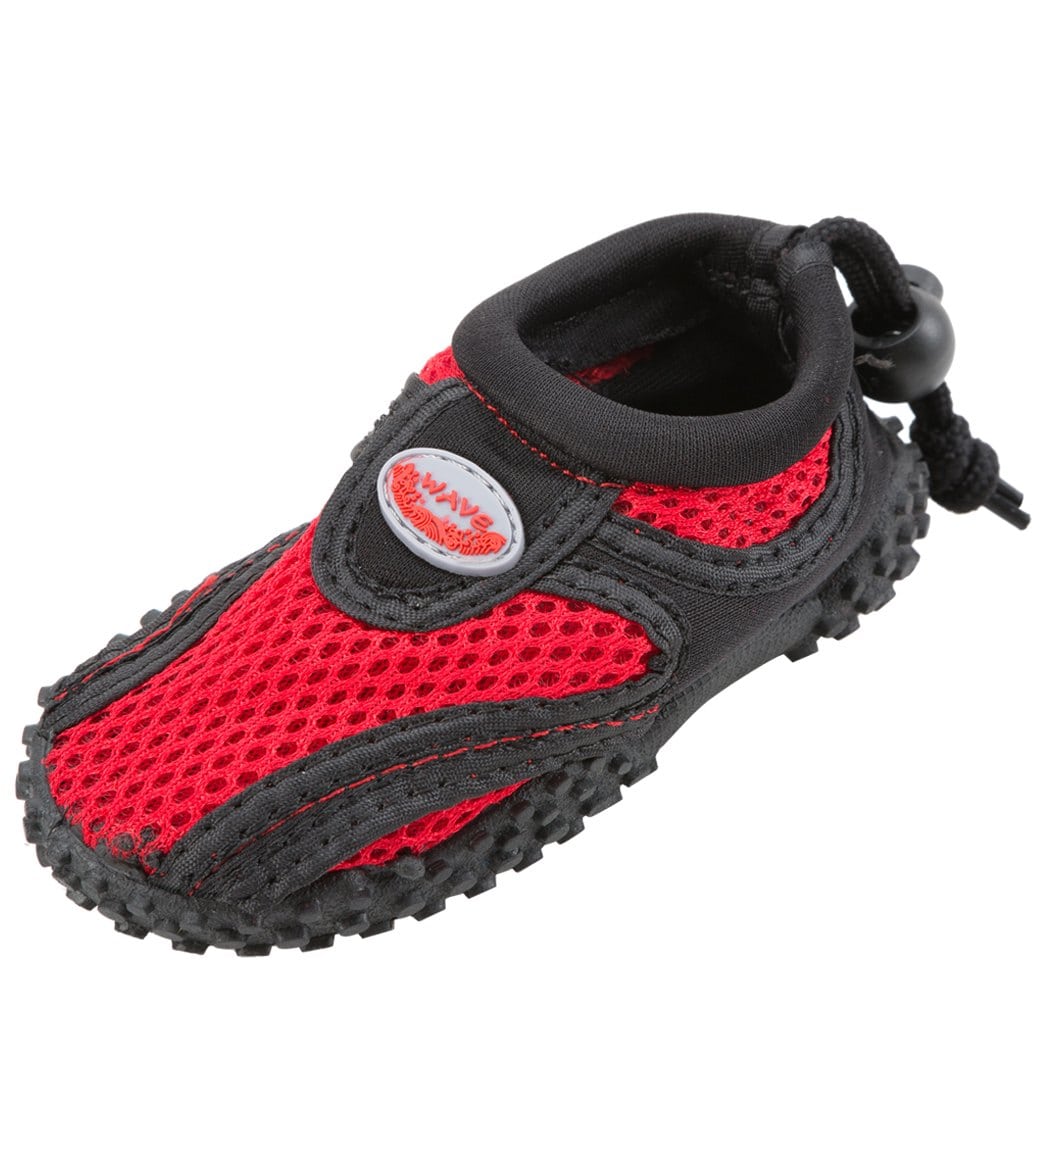 Easy Usa Infants Water Shoes - Black/Red 5 - Swimoutlet.com